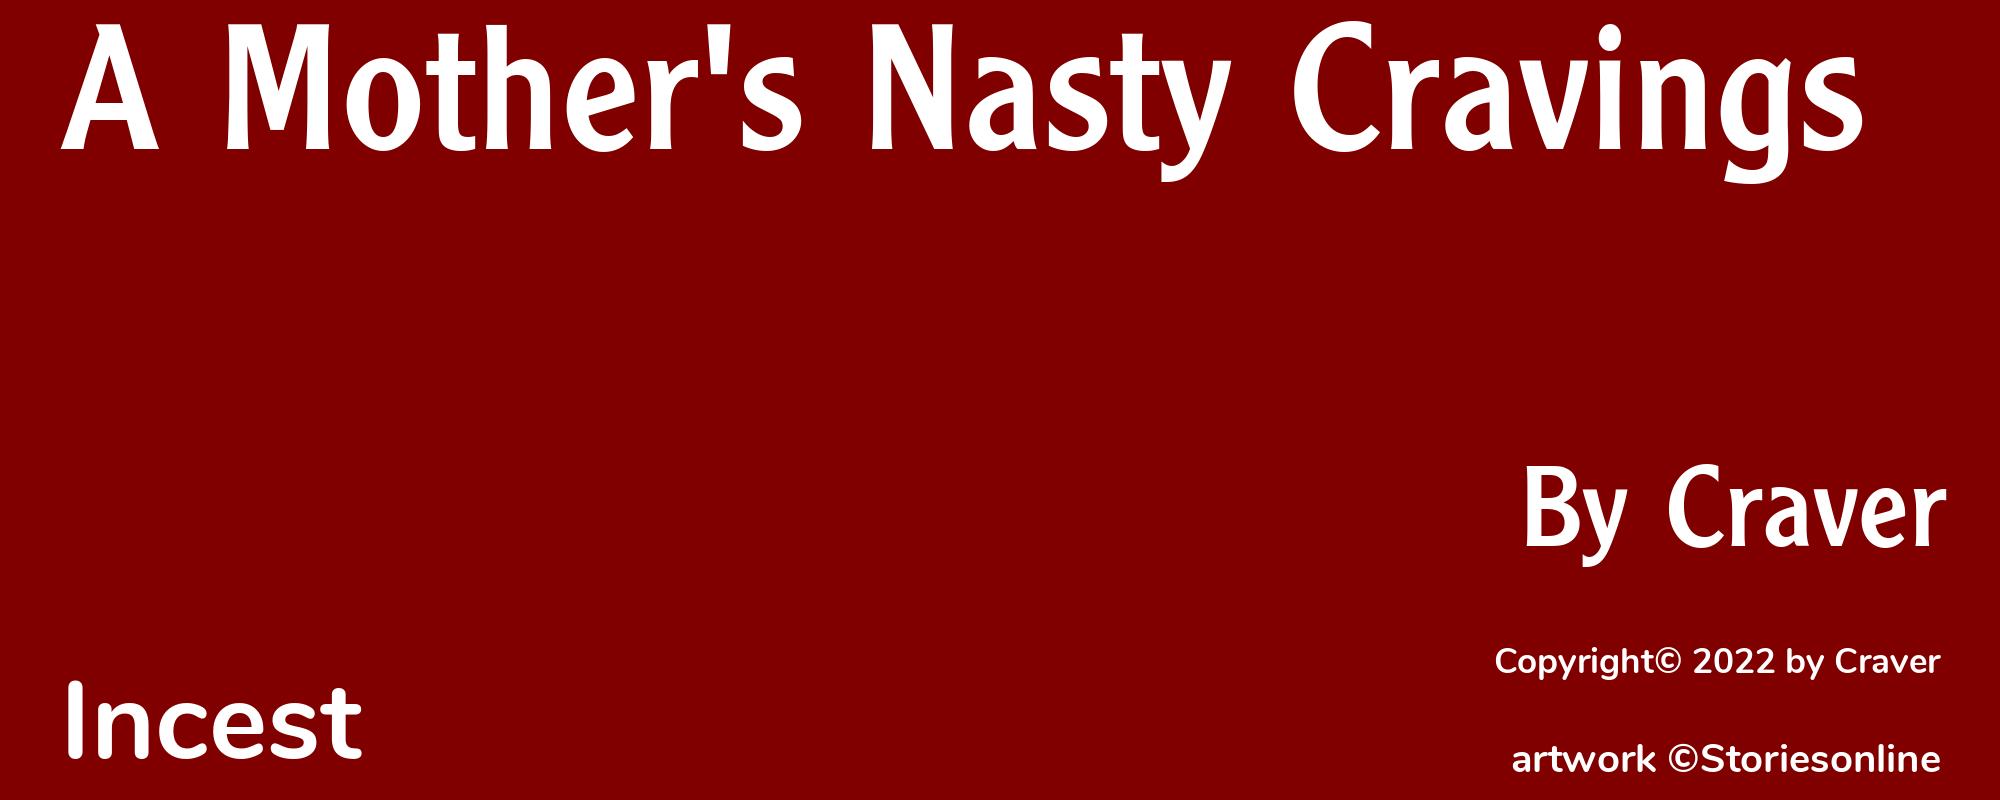 A Mother's Nasty Cravings - Cover